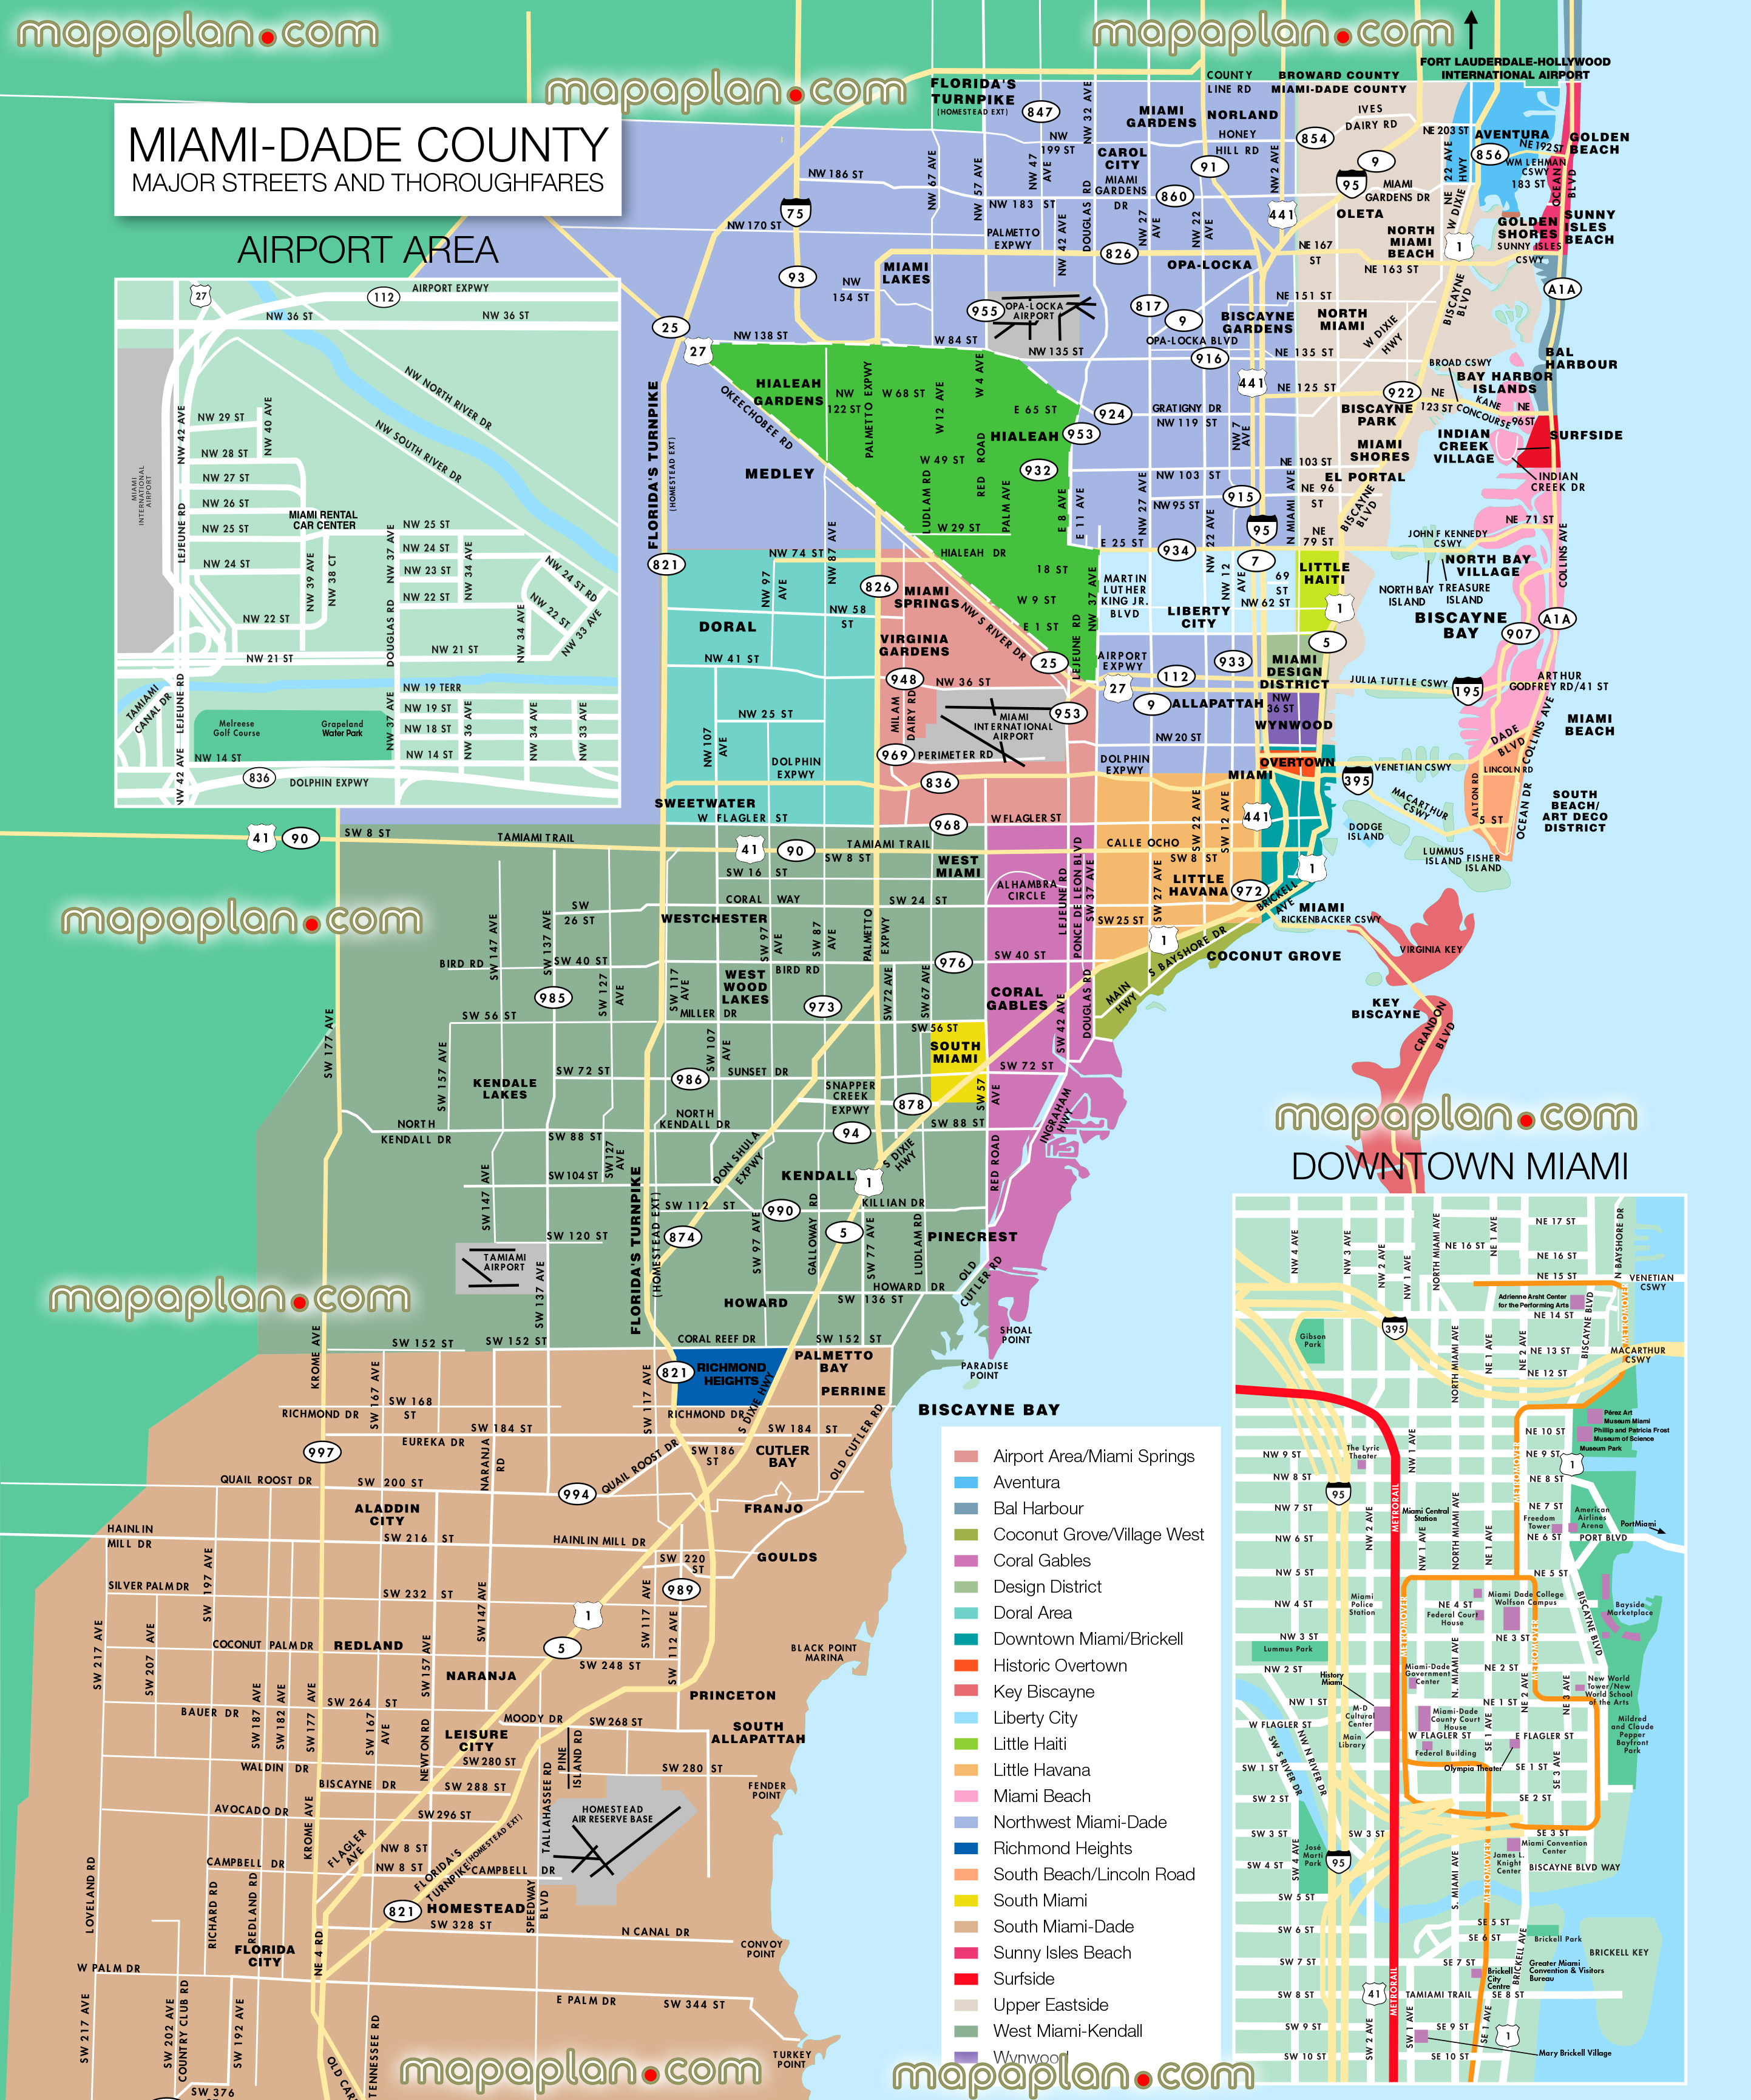 Miami dade county districts streets historic city centre port railway coach stations airport high detail pdf poster plan great spots best must see sights detailed view orientation navigation directions